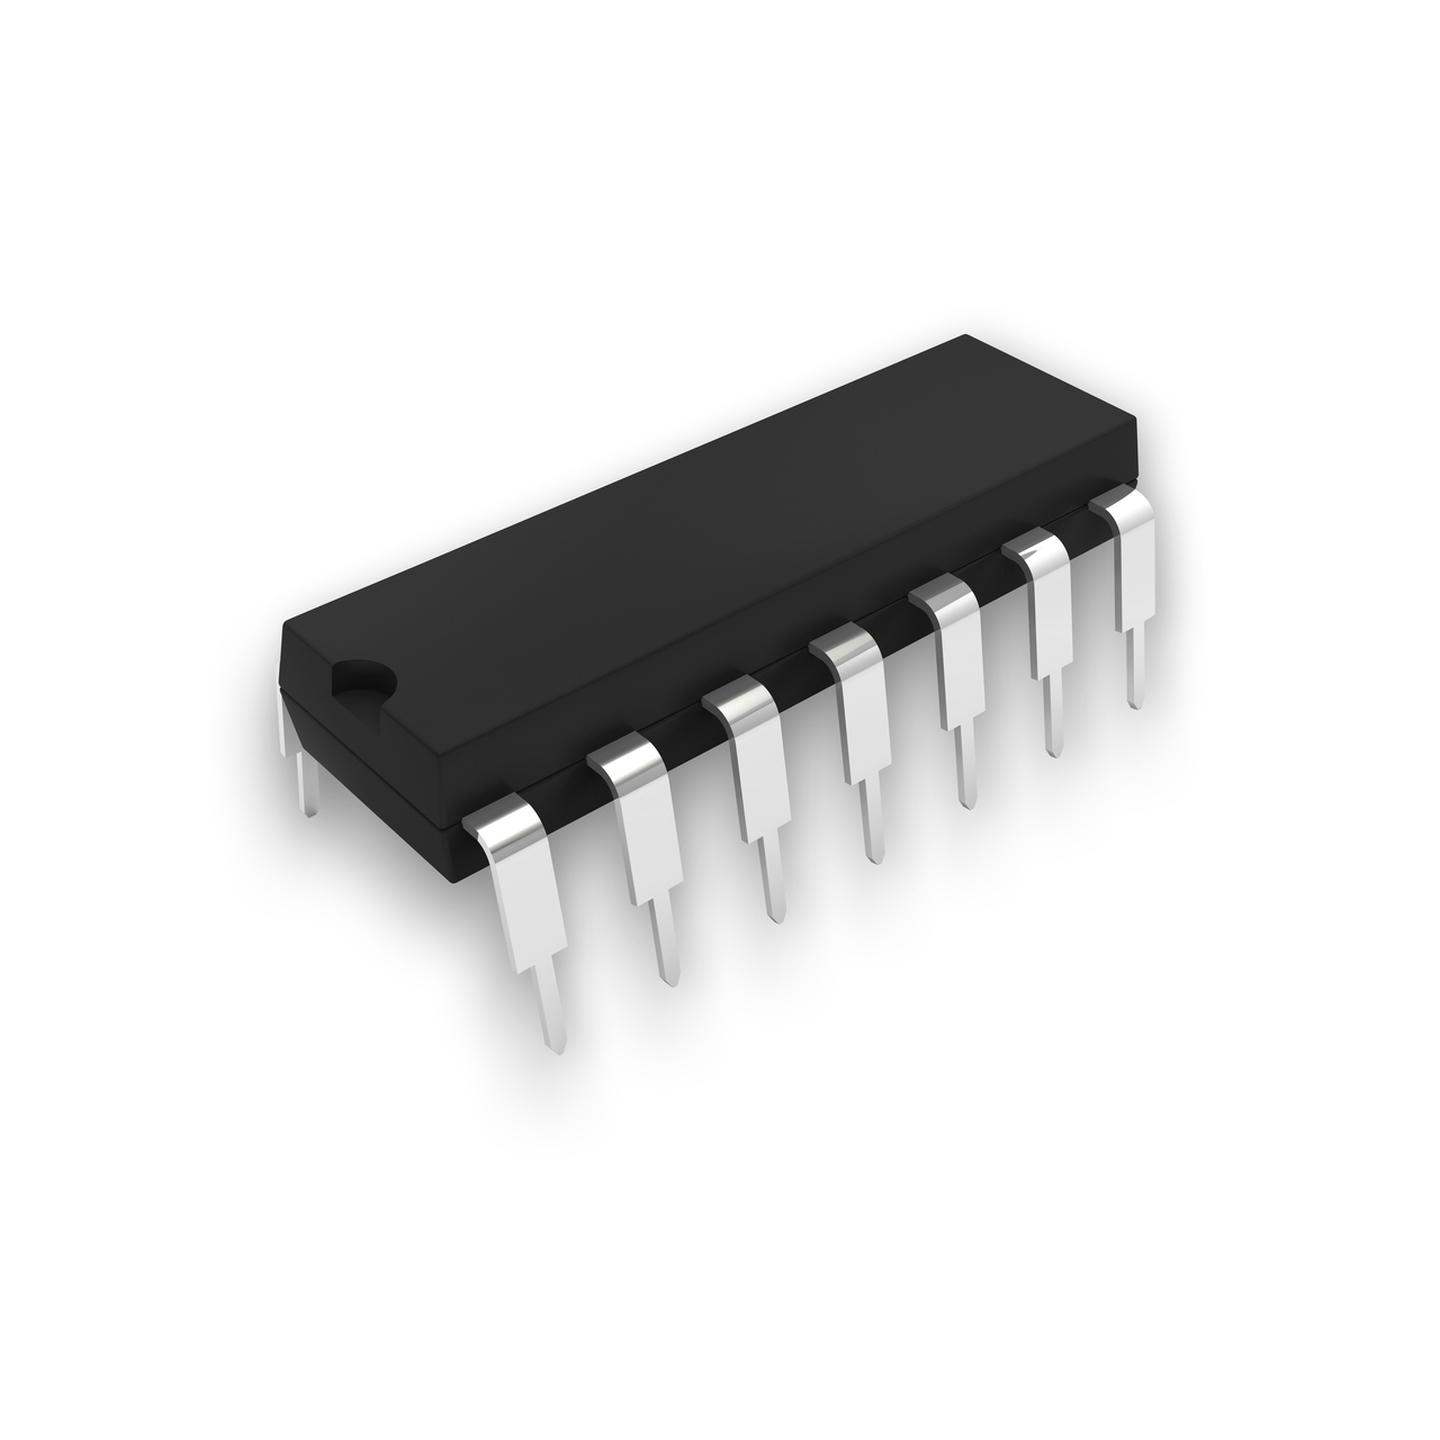 LM324 Quad Low Power Op-Amp Linear IC